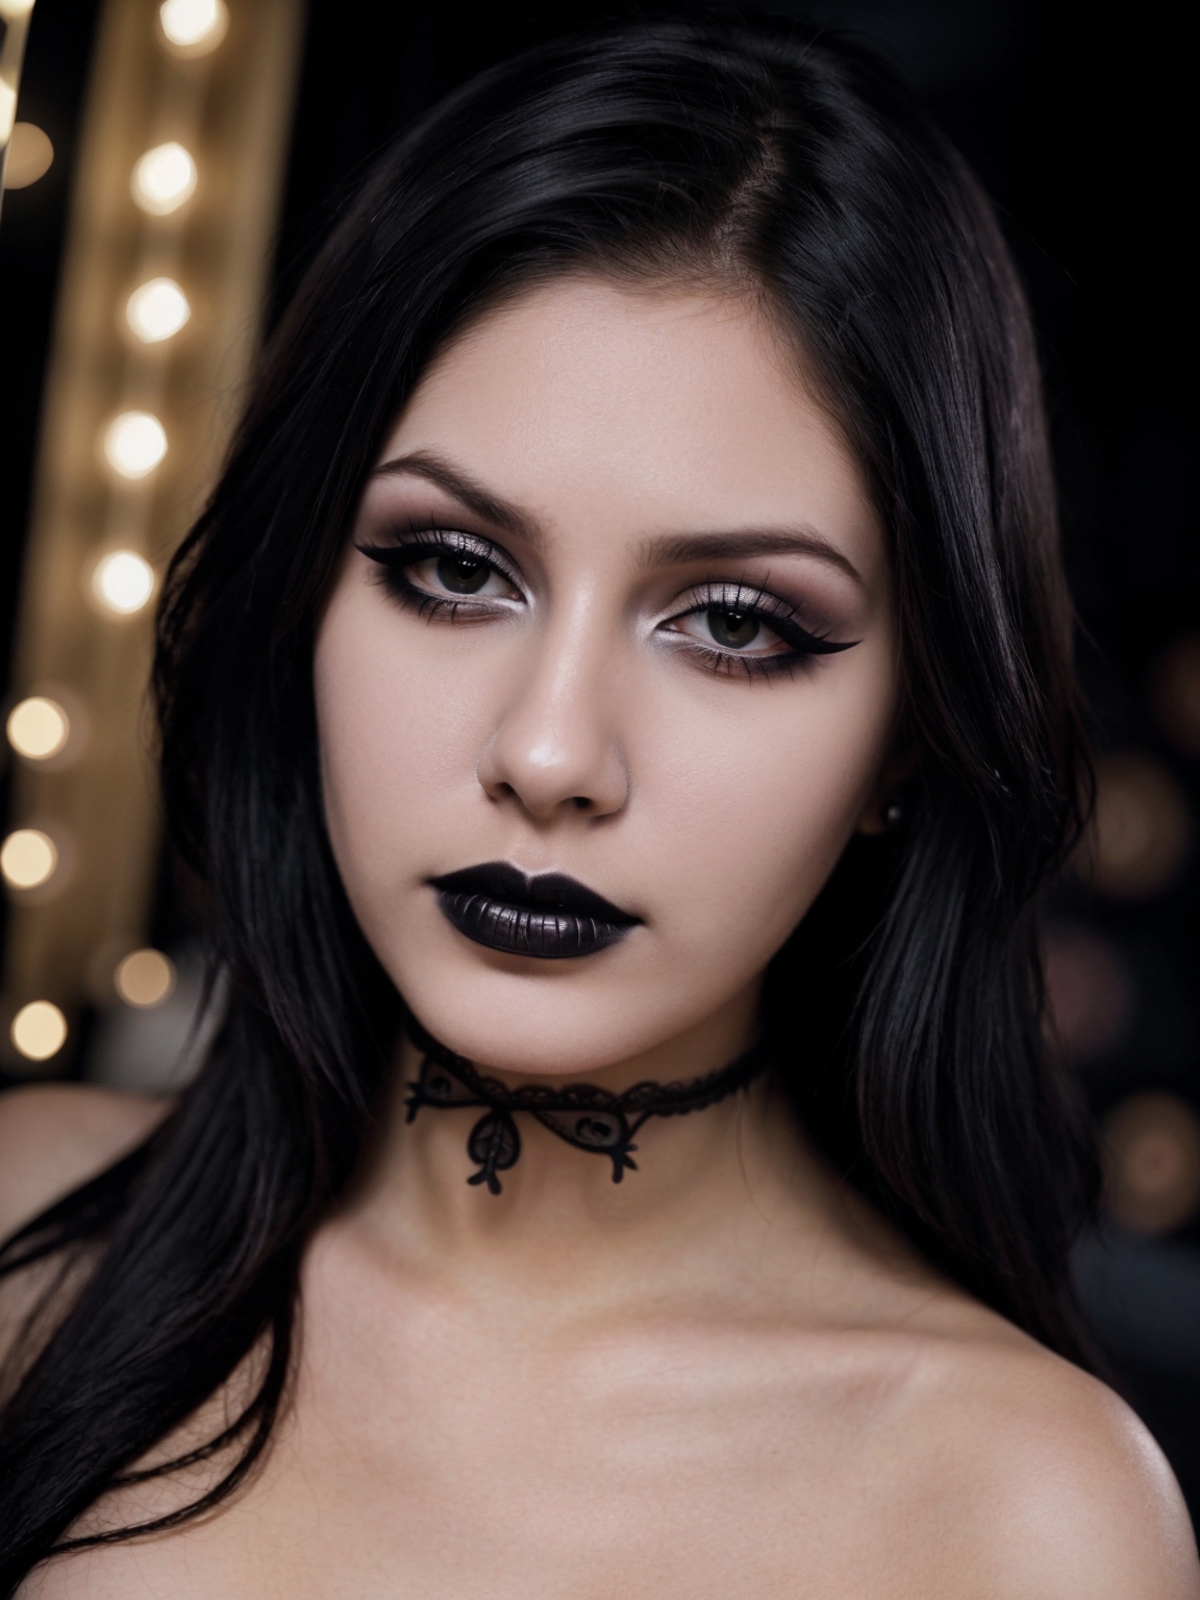 A woman with black lipstick and a black choker necklace.